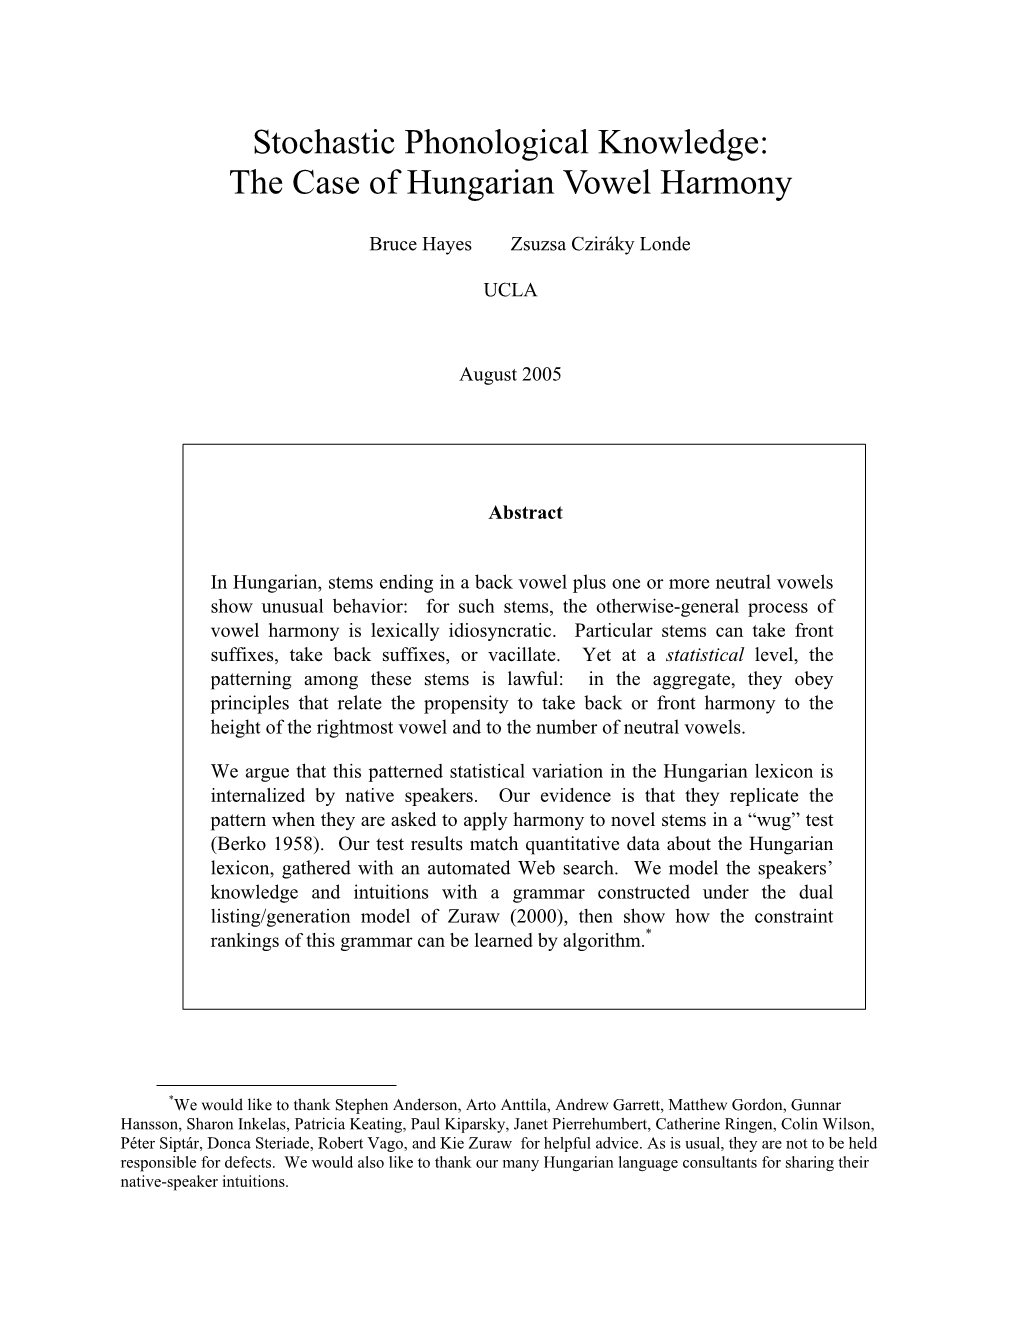 The Case of Hungarian Vowel Harmony